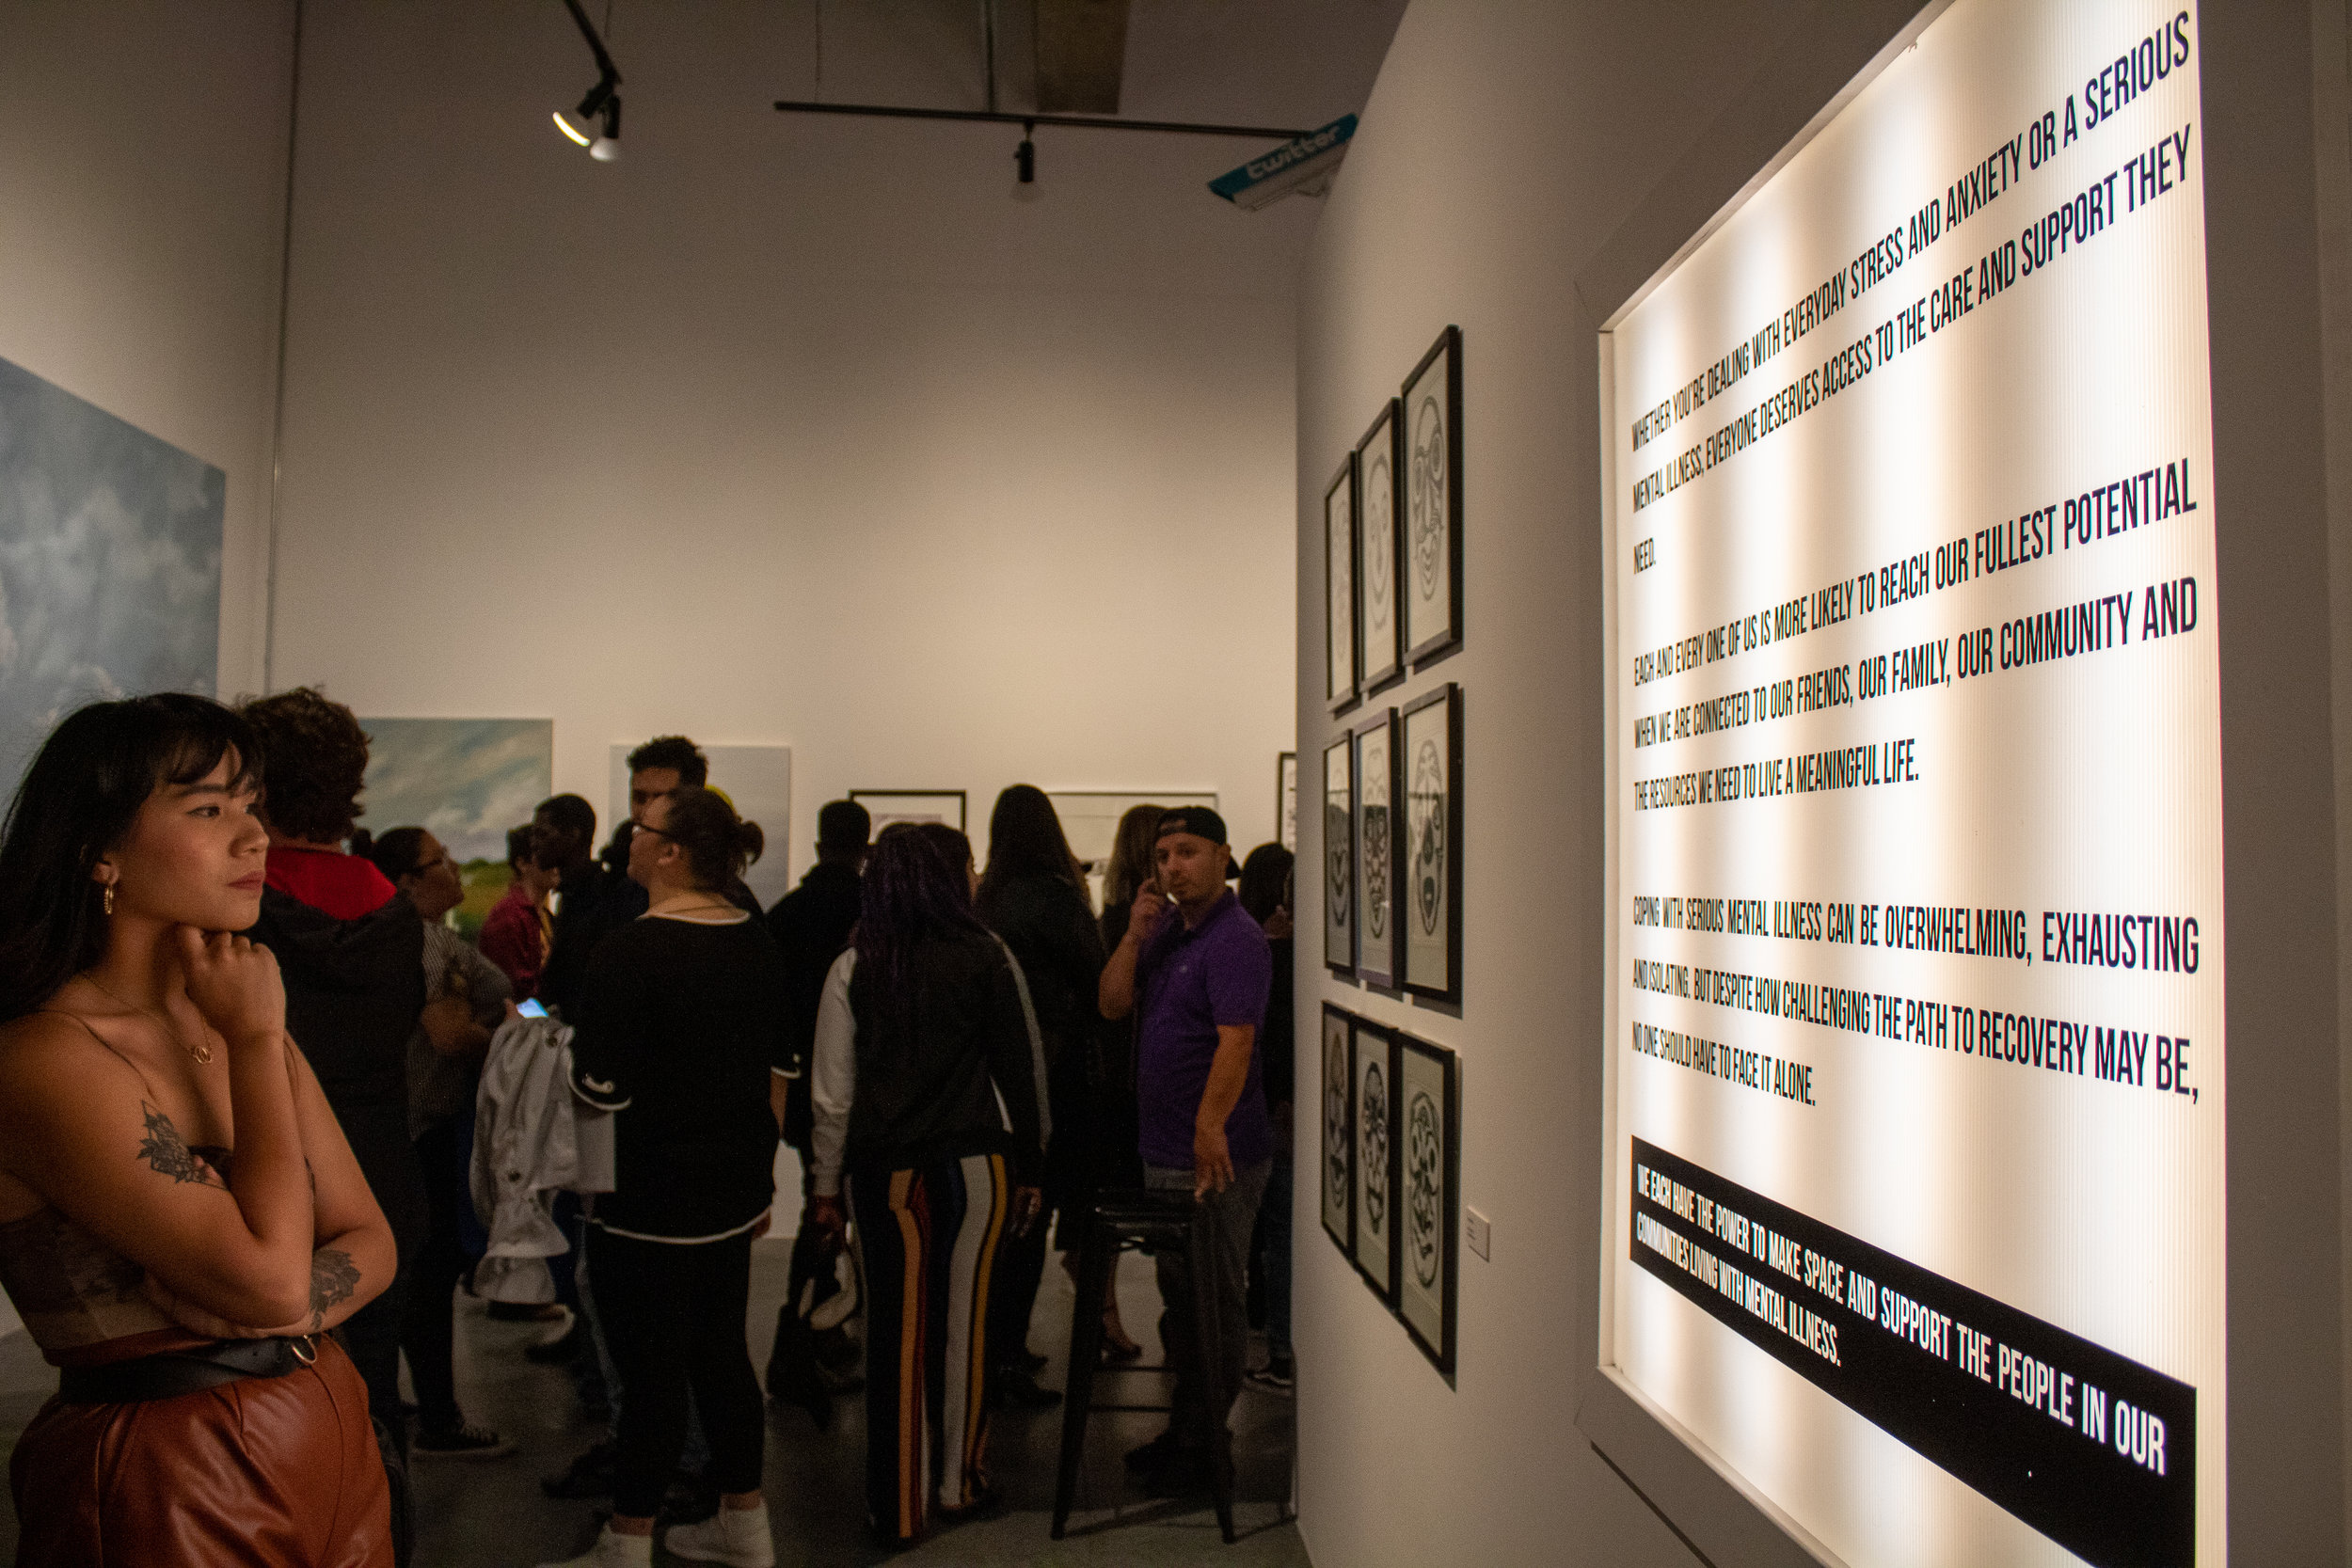  Attendees observe the exhibitions that fill the gallery space of We Rise LA on May 17, 2019. We Rise is a pop-up immersive art gallery and community space in Los Angeles, California, focused on themes of Connectedness and Purpose, aiming to engage w